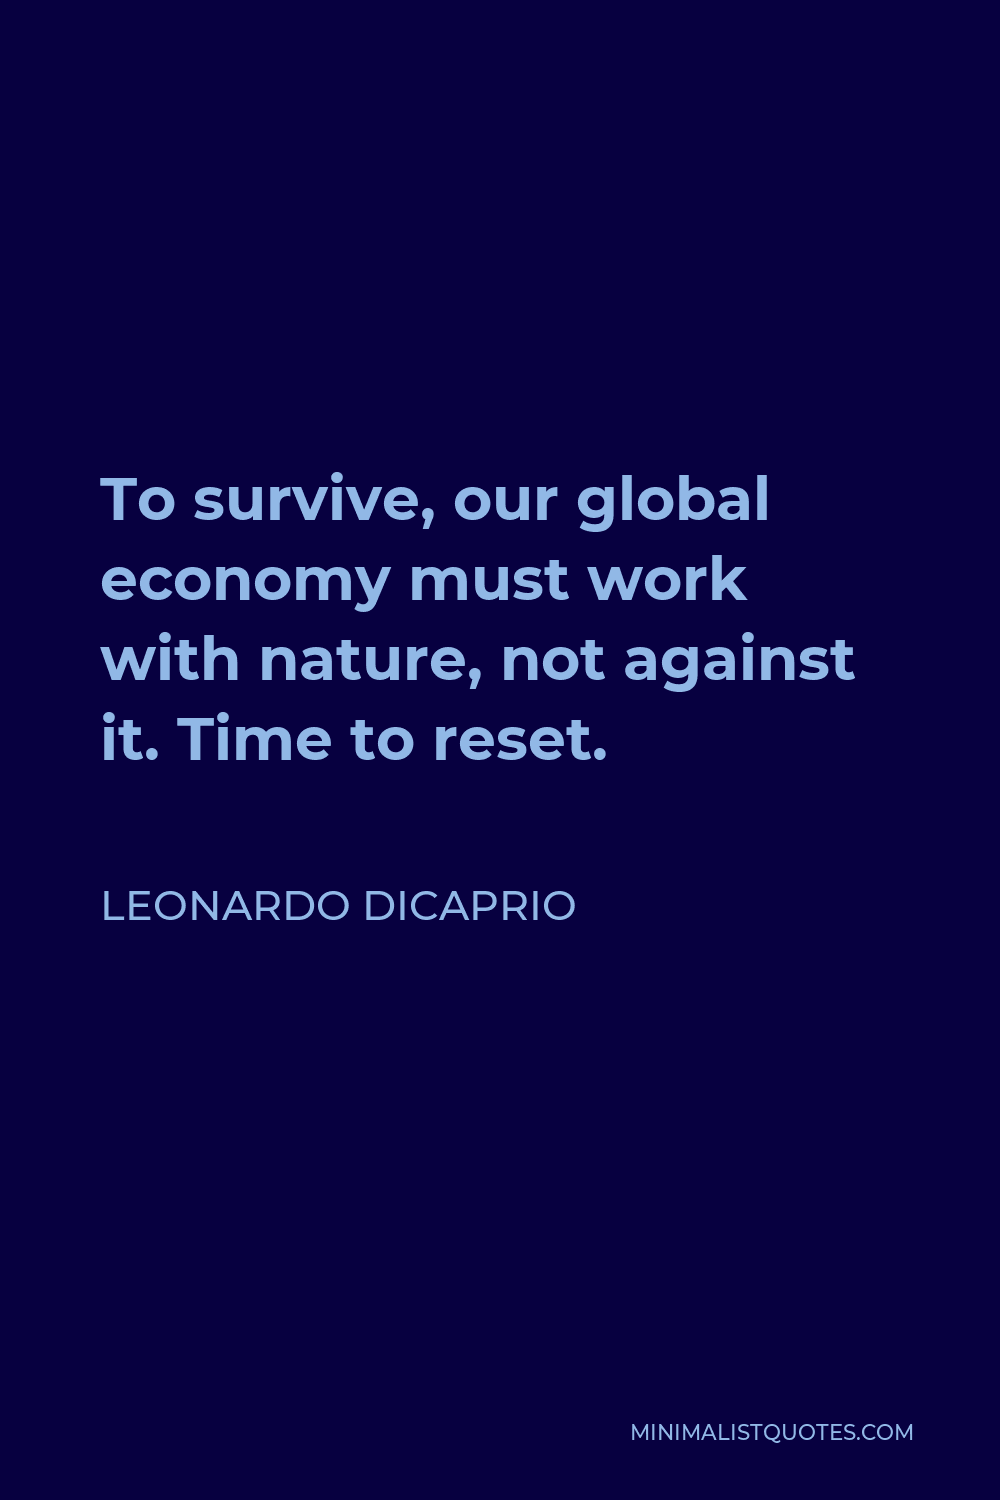 Leonardo DiCaprio Quote - To survive, our global economy must work with nature, not against it. Time to reset.